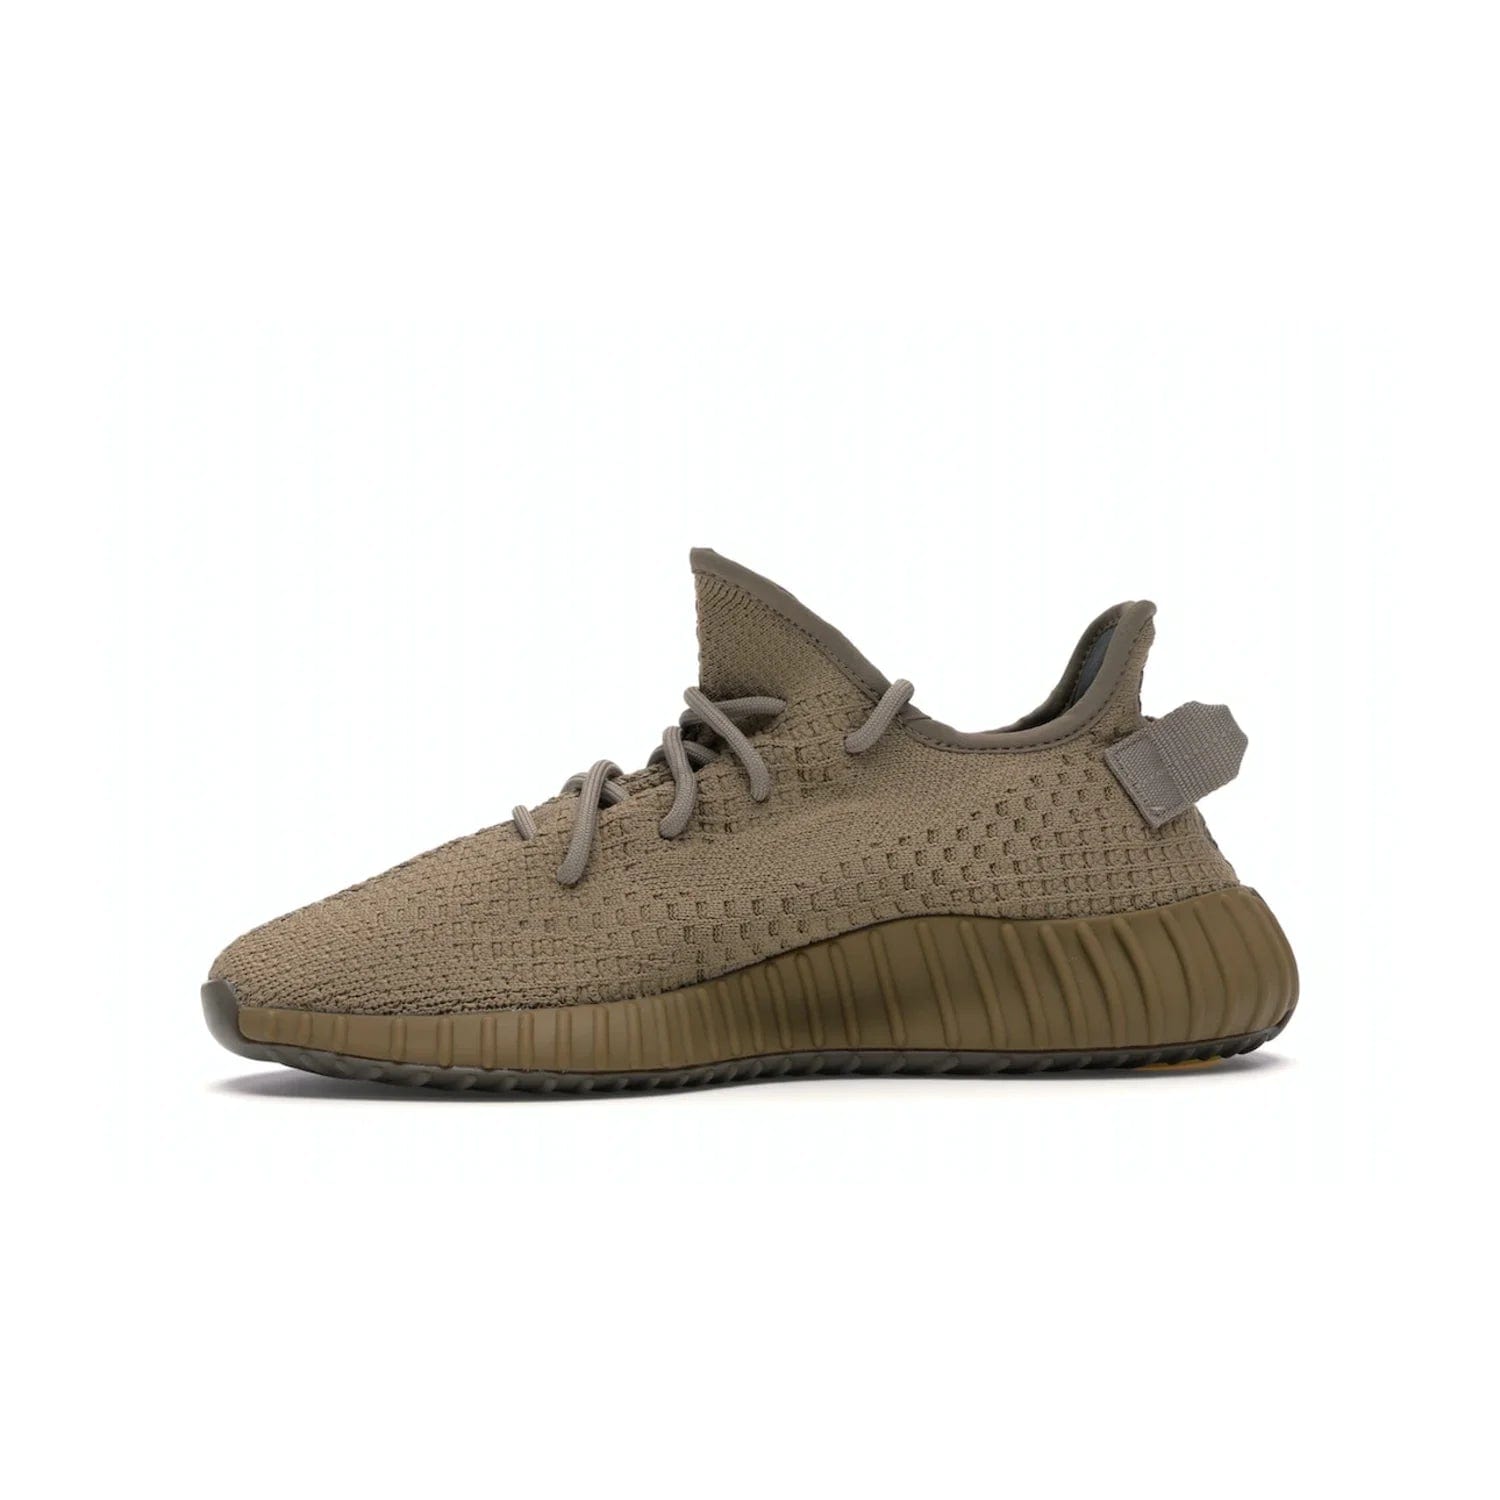 adidas Yeezy Boost 350 V2 Earth - Image 18 - Only at www.BallersClubKickz.com - Abstract style with the adidas Yeezy Boost 350 V2 Earth. Crafted with mud Primeknit upper, mud Boost and interior, and a translucent side stripe. Regional exclusive in Earth/Earth/Earth colorway, these fashionable sneakers released in February 2020. Showcase your style with the Yeezy 350 V2 Earth.